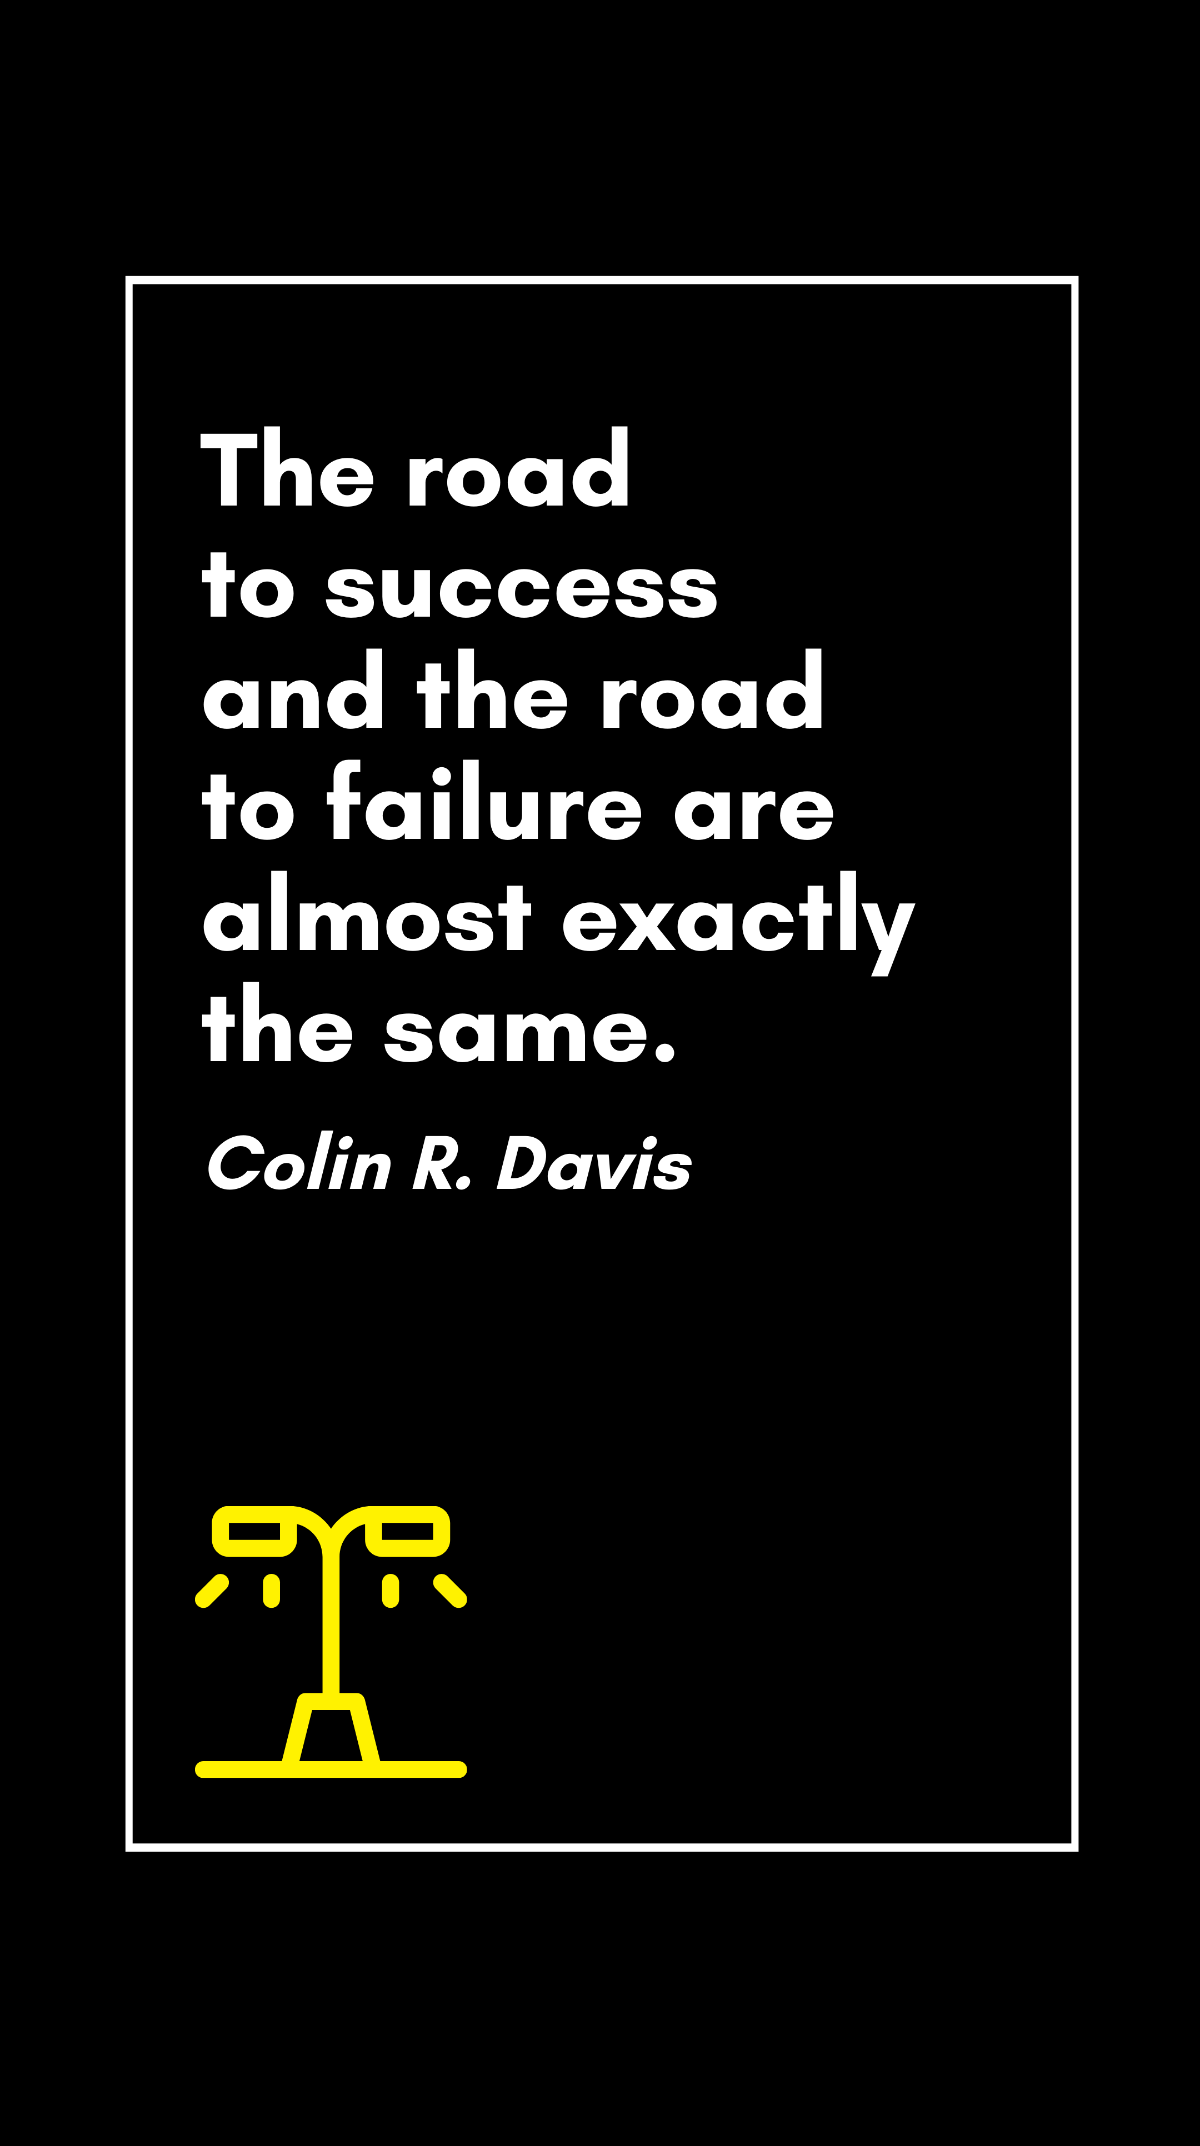 Colin R. Davis - The road to success and the road to failure are almost exactly the same. Template